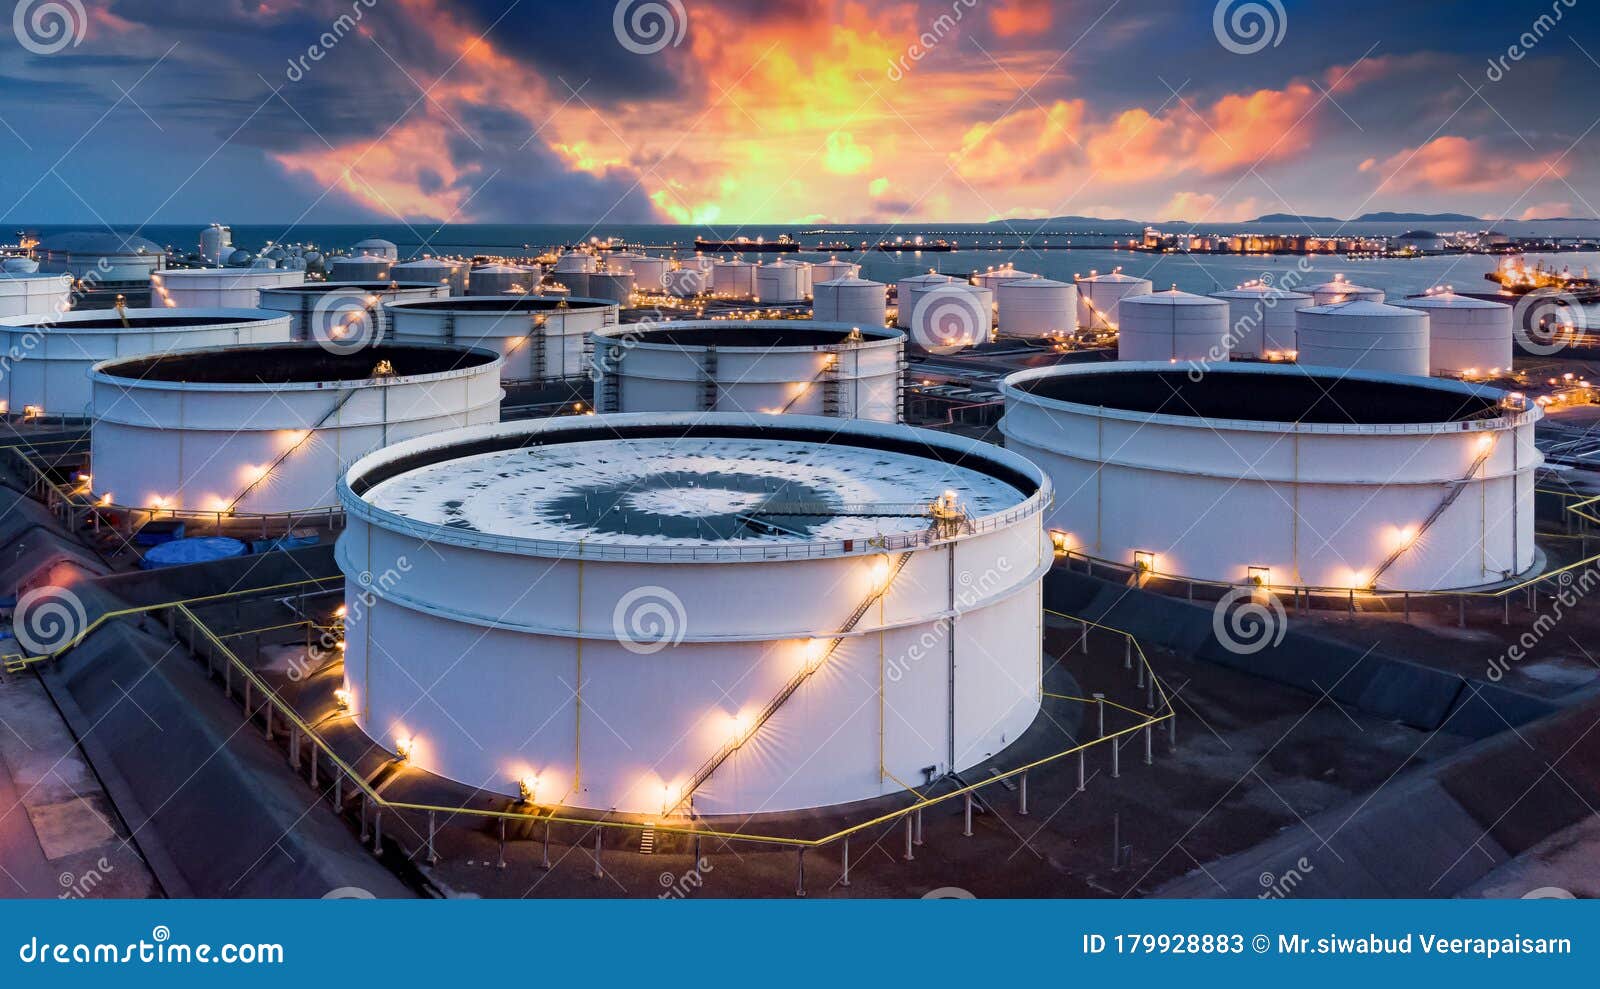 storage of chemical products like oil, petrol, gas, aerial view oil storage tank terminal and tanker, petrol industrial zone,